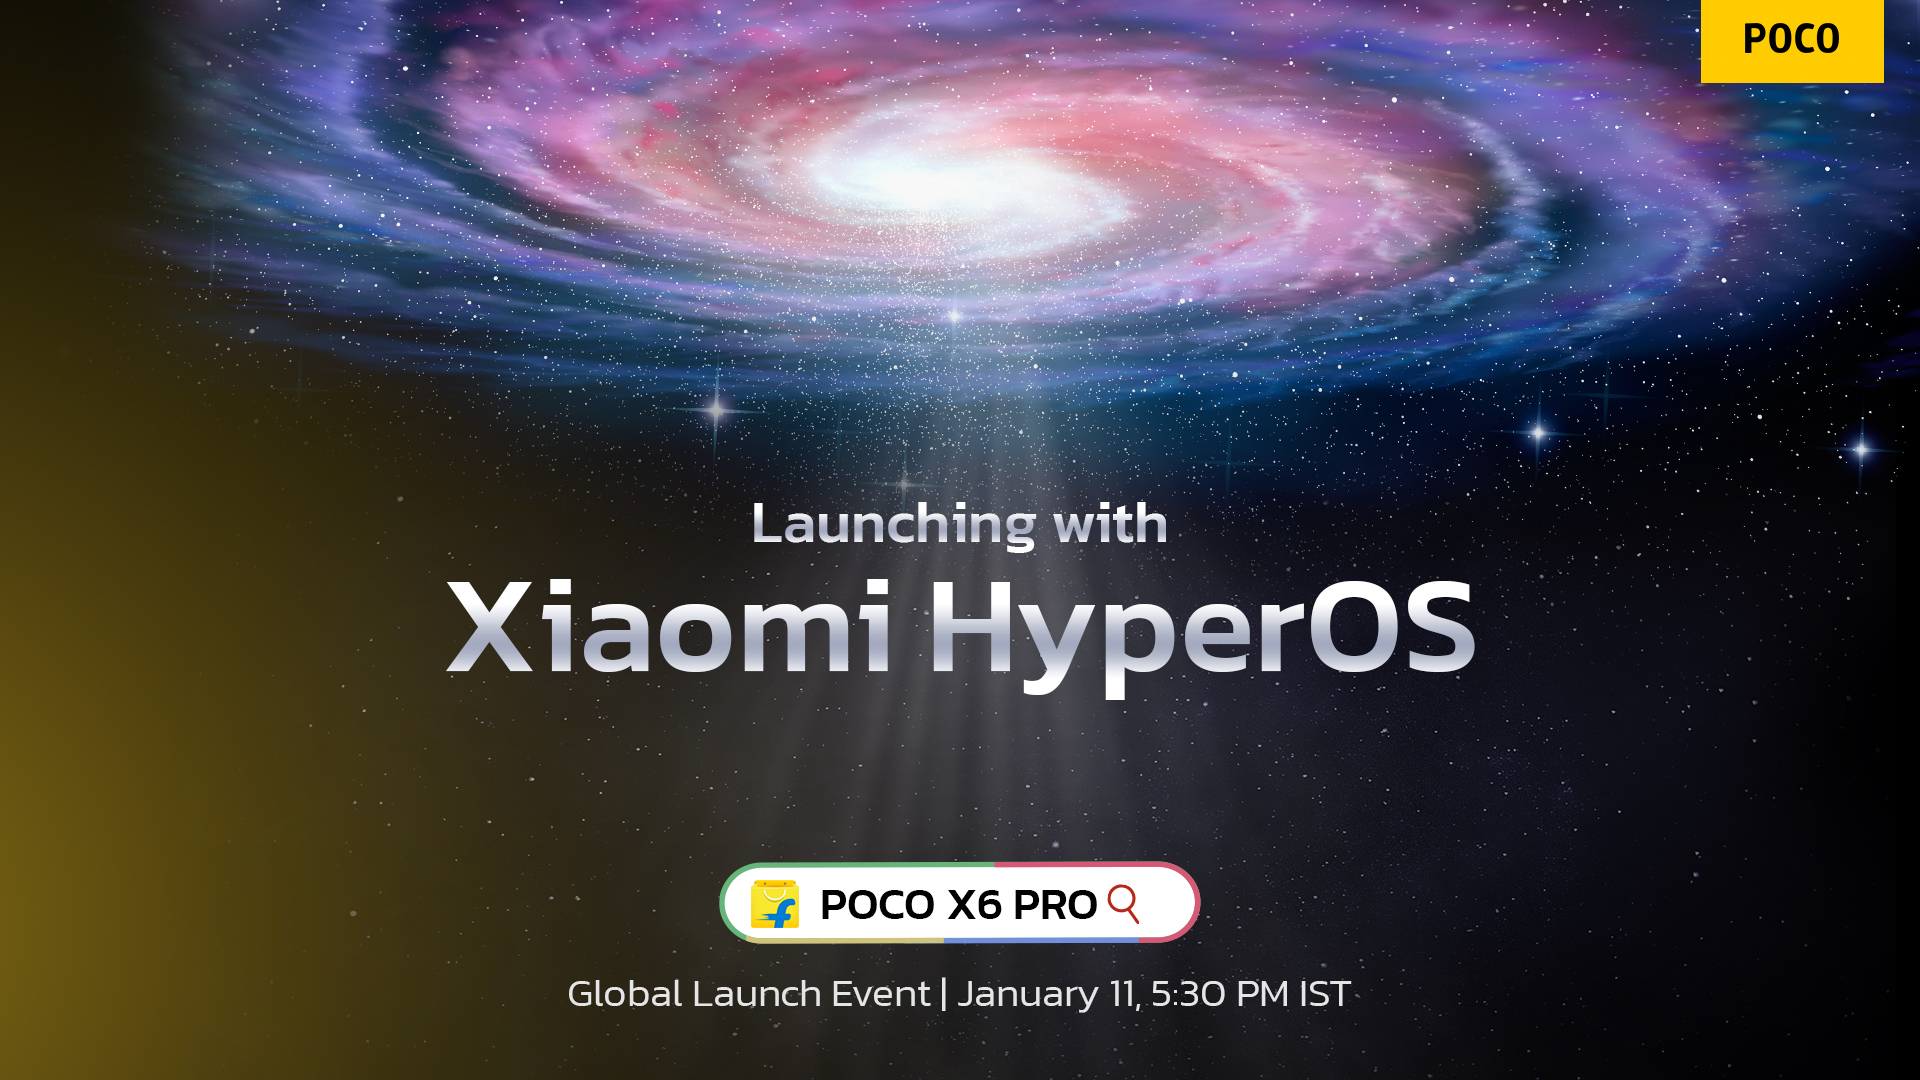 POCO X6 Pro 5G Confirmed To Launch With HyperOS Out Of The Box - Gizmochina